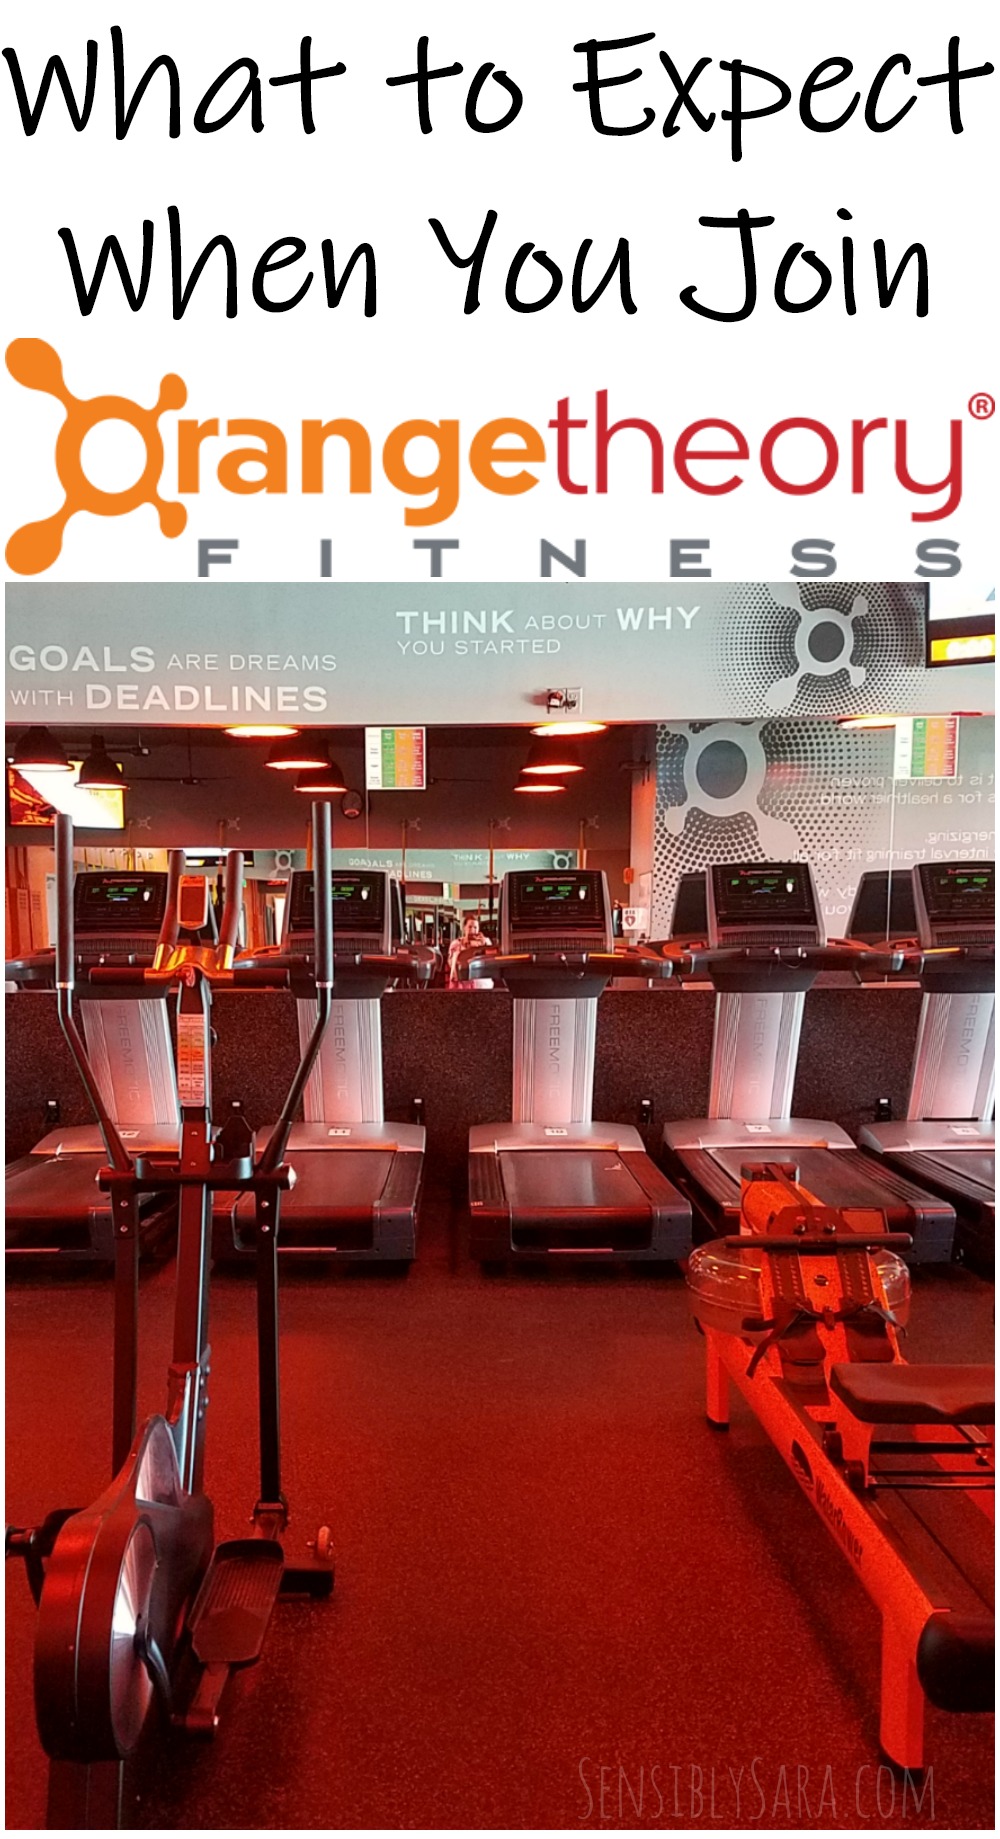 What to Expect When You Join OrangeTheory Fitness | SensiblySara.com